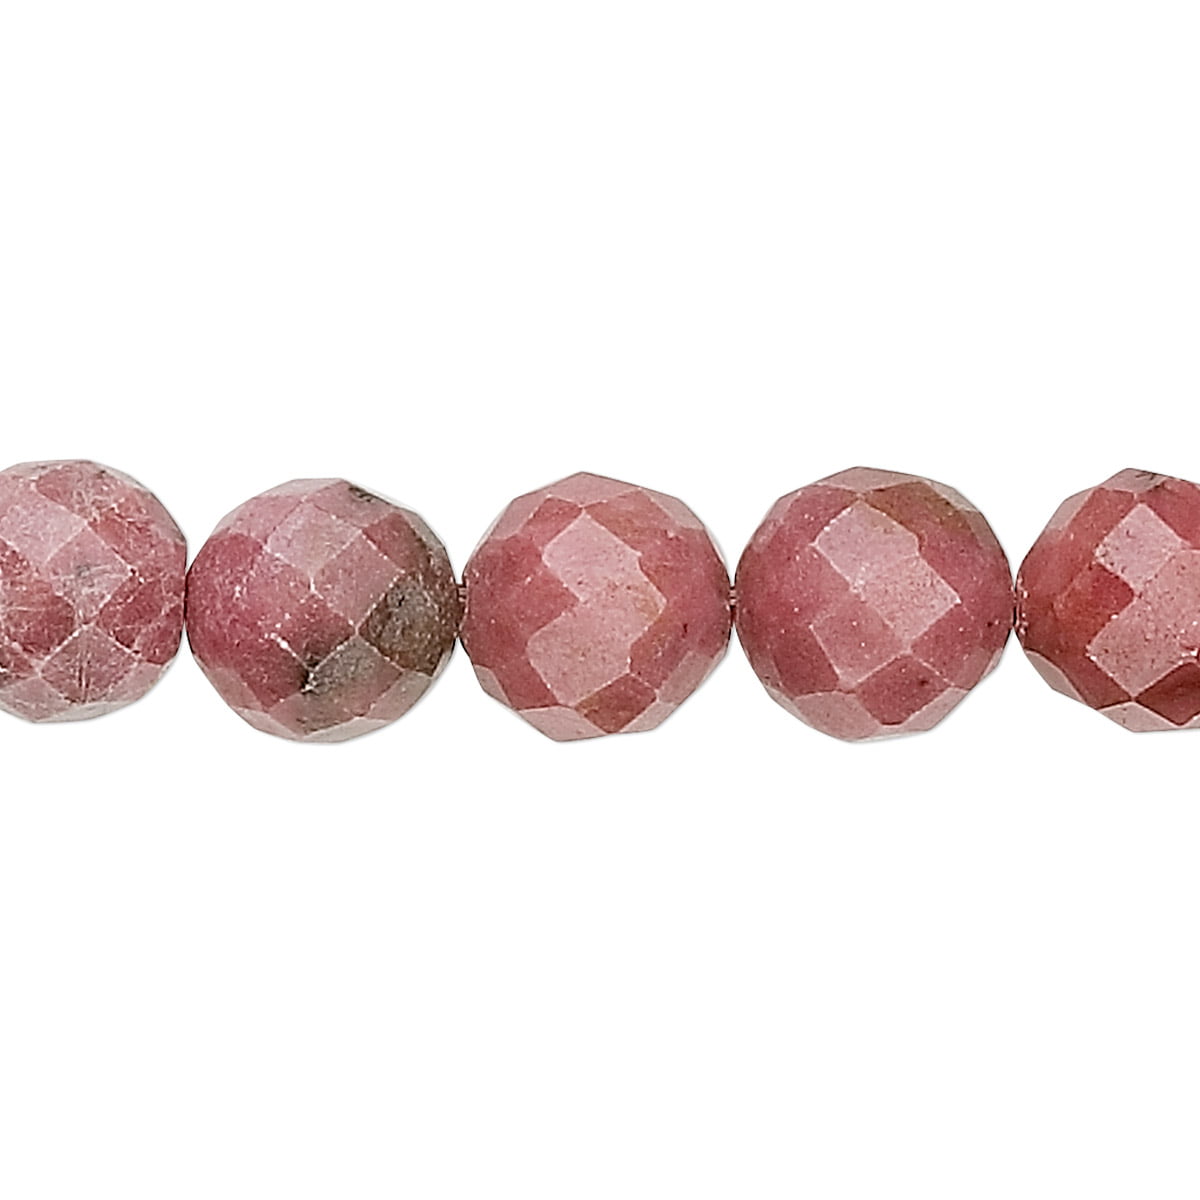 Natural Smooth Faceted Rhodonite Stone Beads For Jewelry Making 6,8,10,12,14mm 